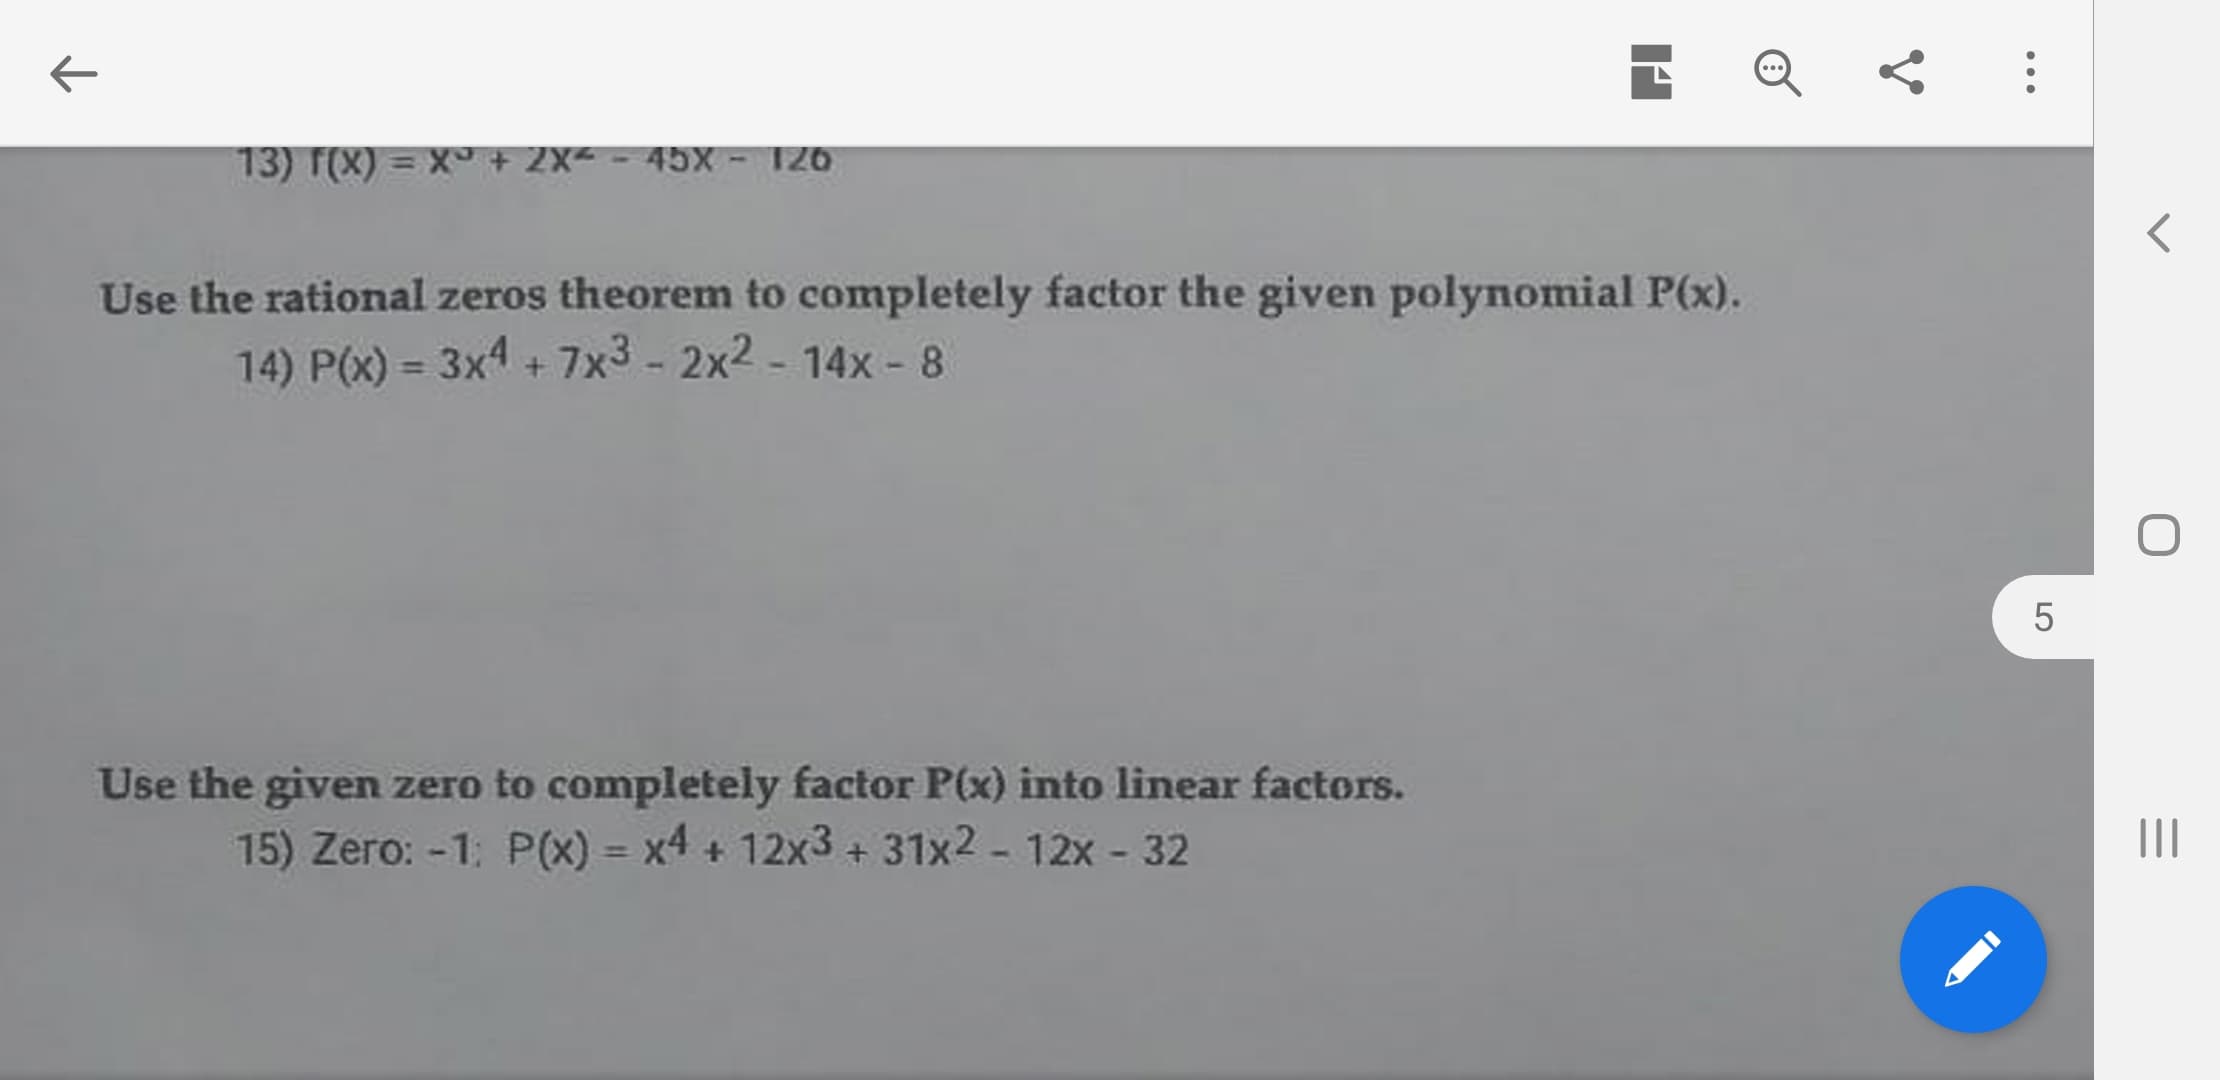 13) f(X) = X°+ 2X< - 45X - 126
Use the rational zeros theorem to completely factor the given polynomial P(x).
14) P(x) = 3x4 + 7x3 - 2x2 - 14x - 8
%3D
Use the given zero to completely factor P(x) into linear factors.
15) Zero: -1: P(x) = x4 + 12x3 + 31x2 - 12x - 32
II
%3D
